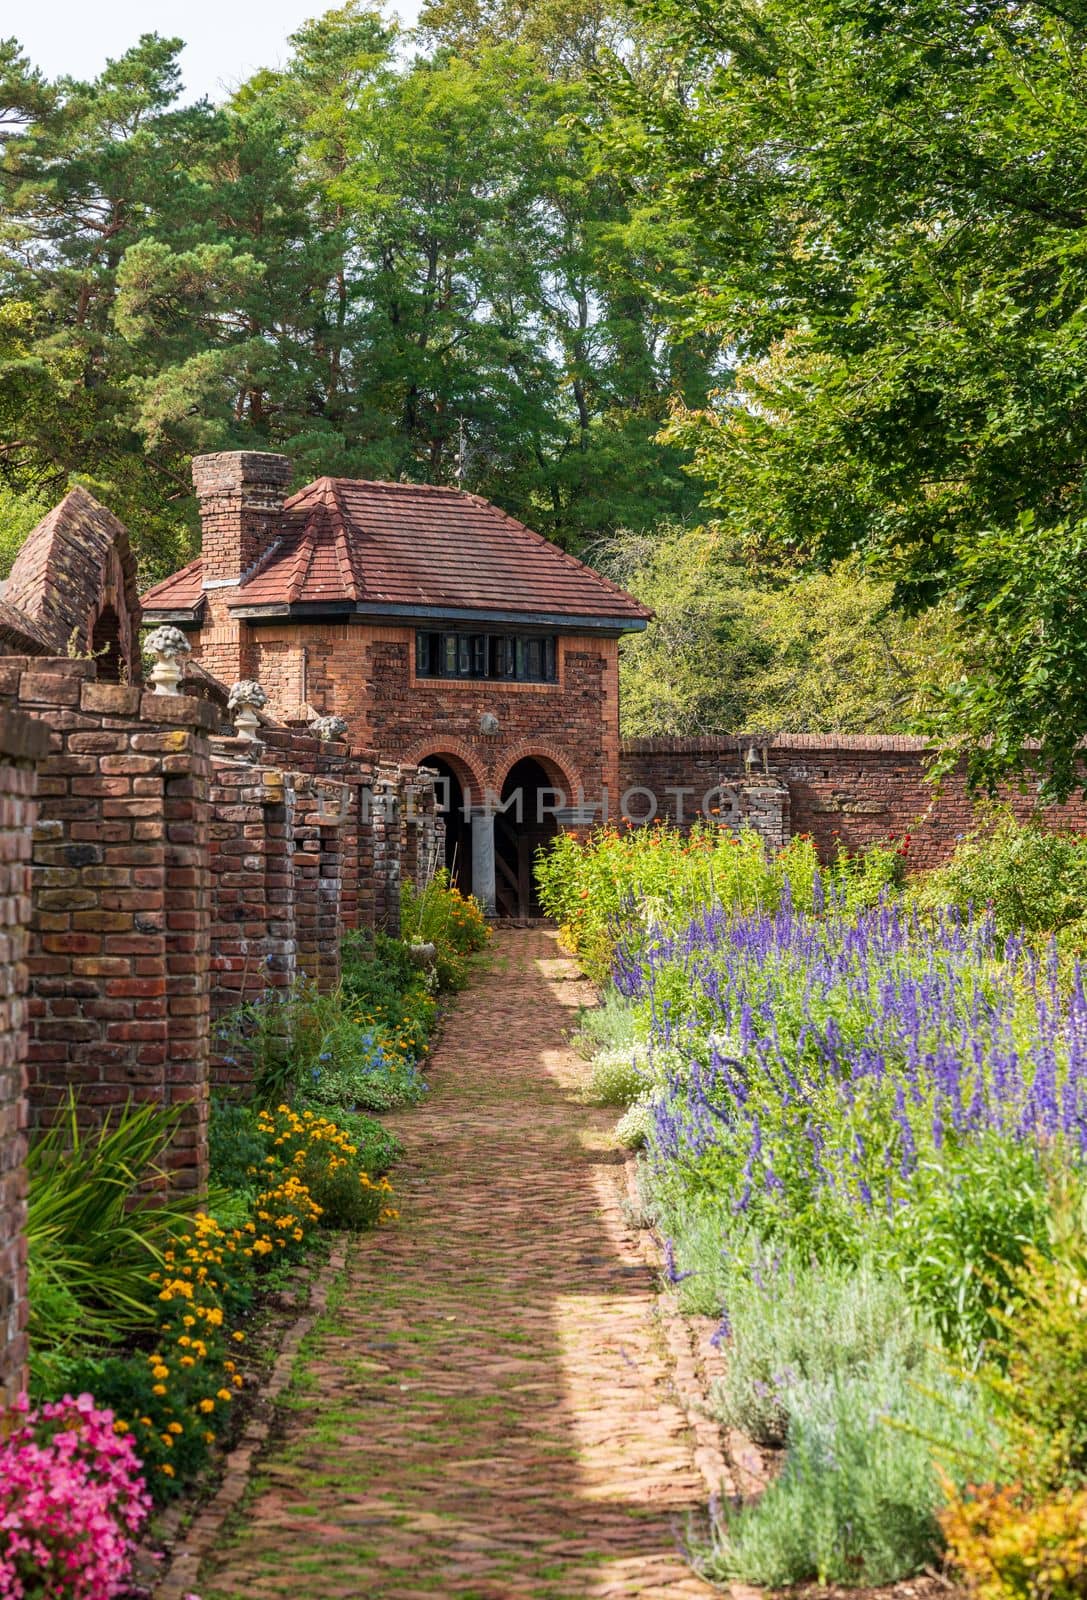 Brick walled garden for vegetables and flowers at Fort by steheap